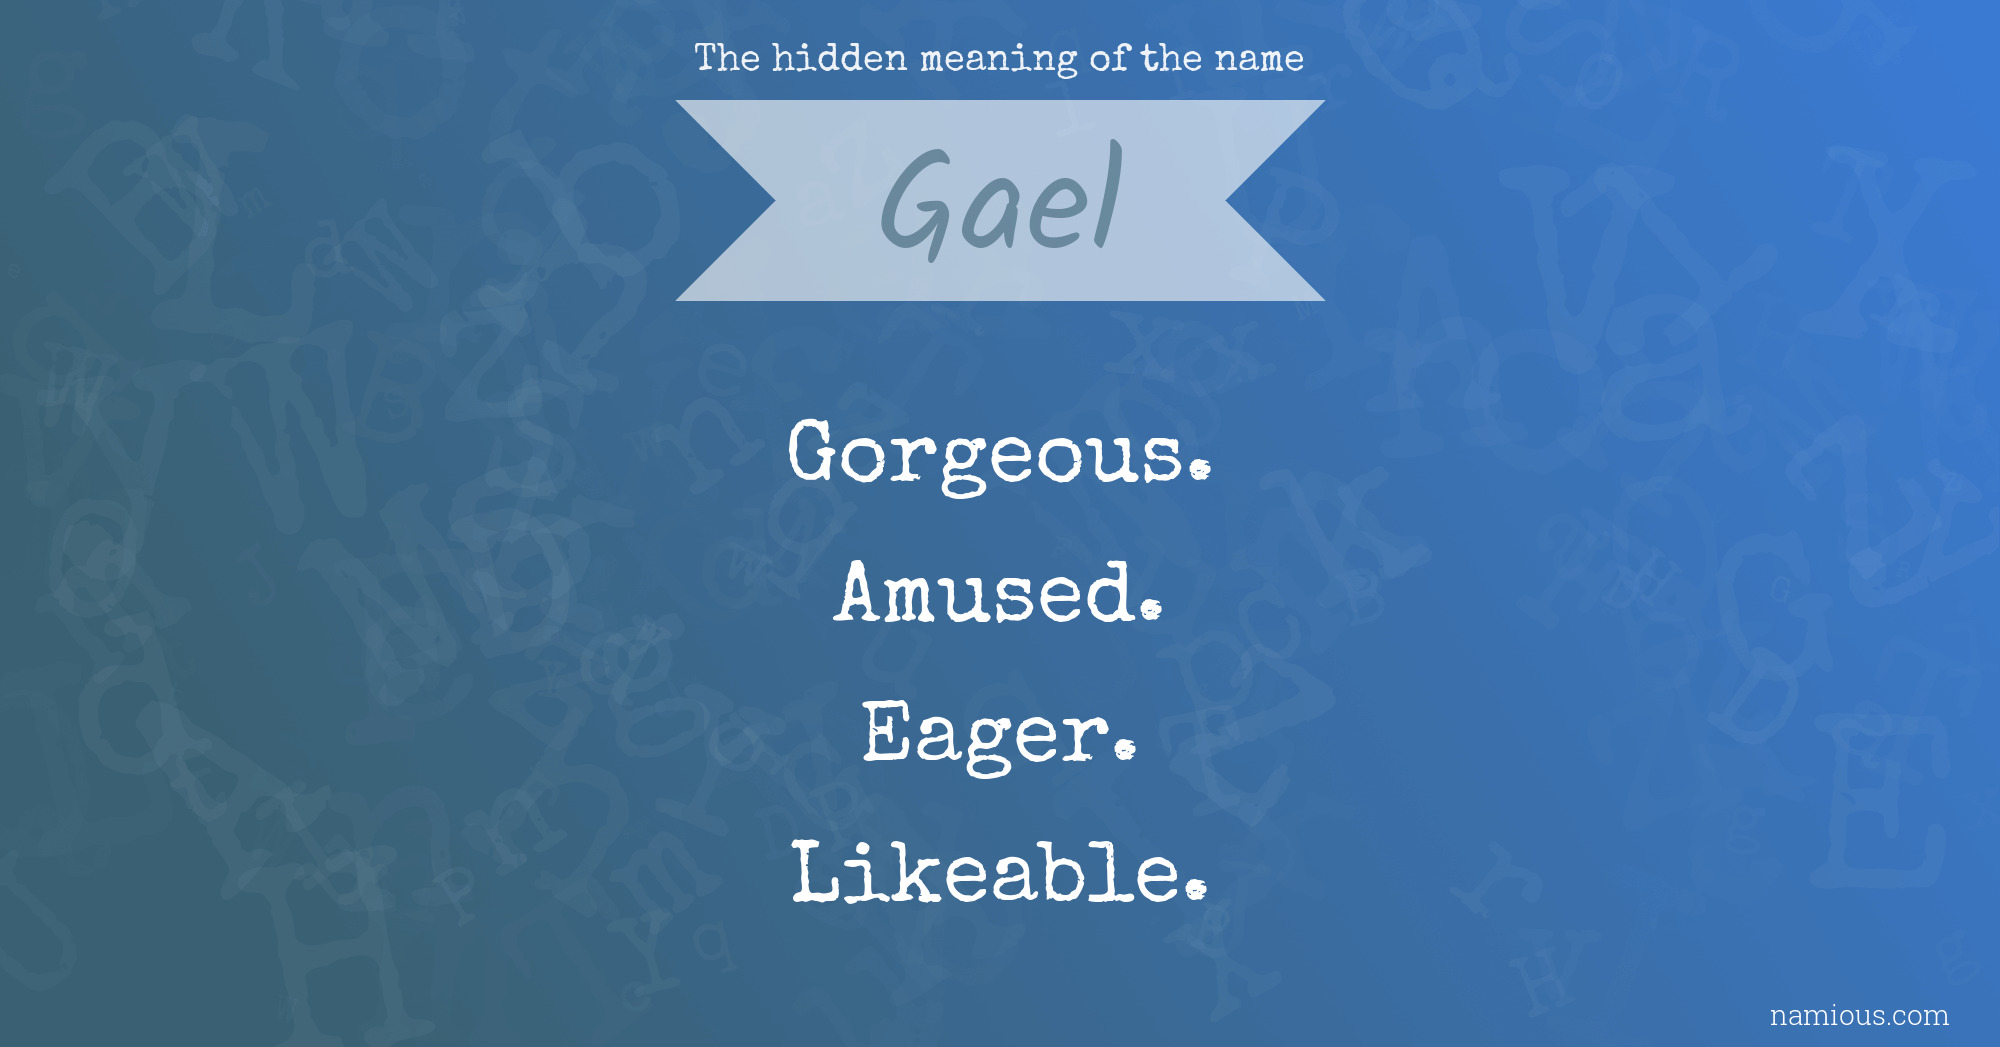 The hidden meaning of the name Gael